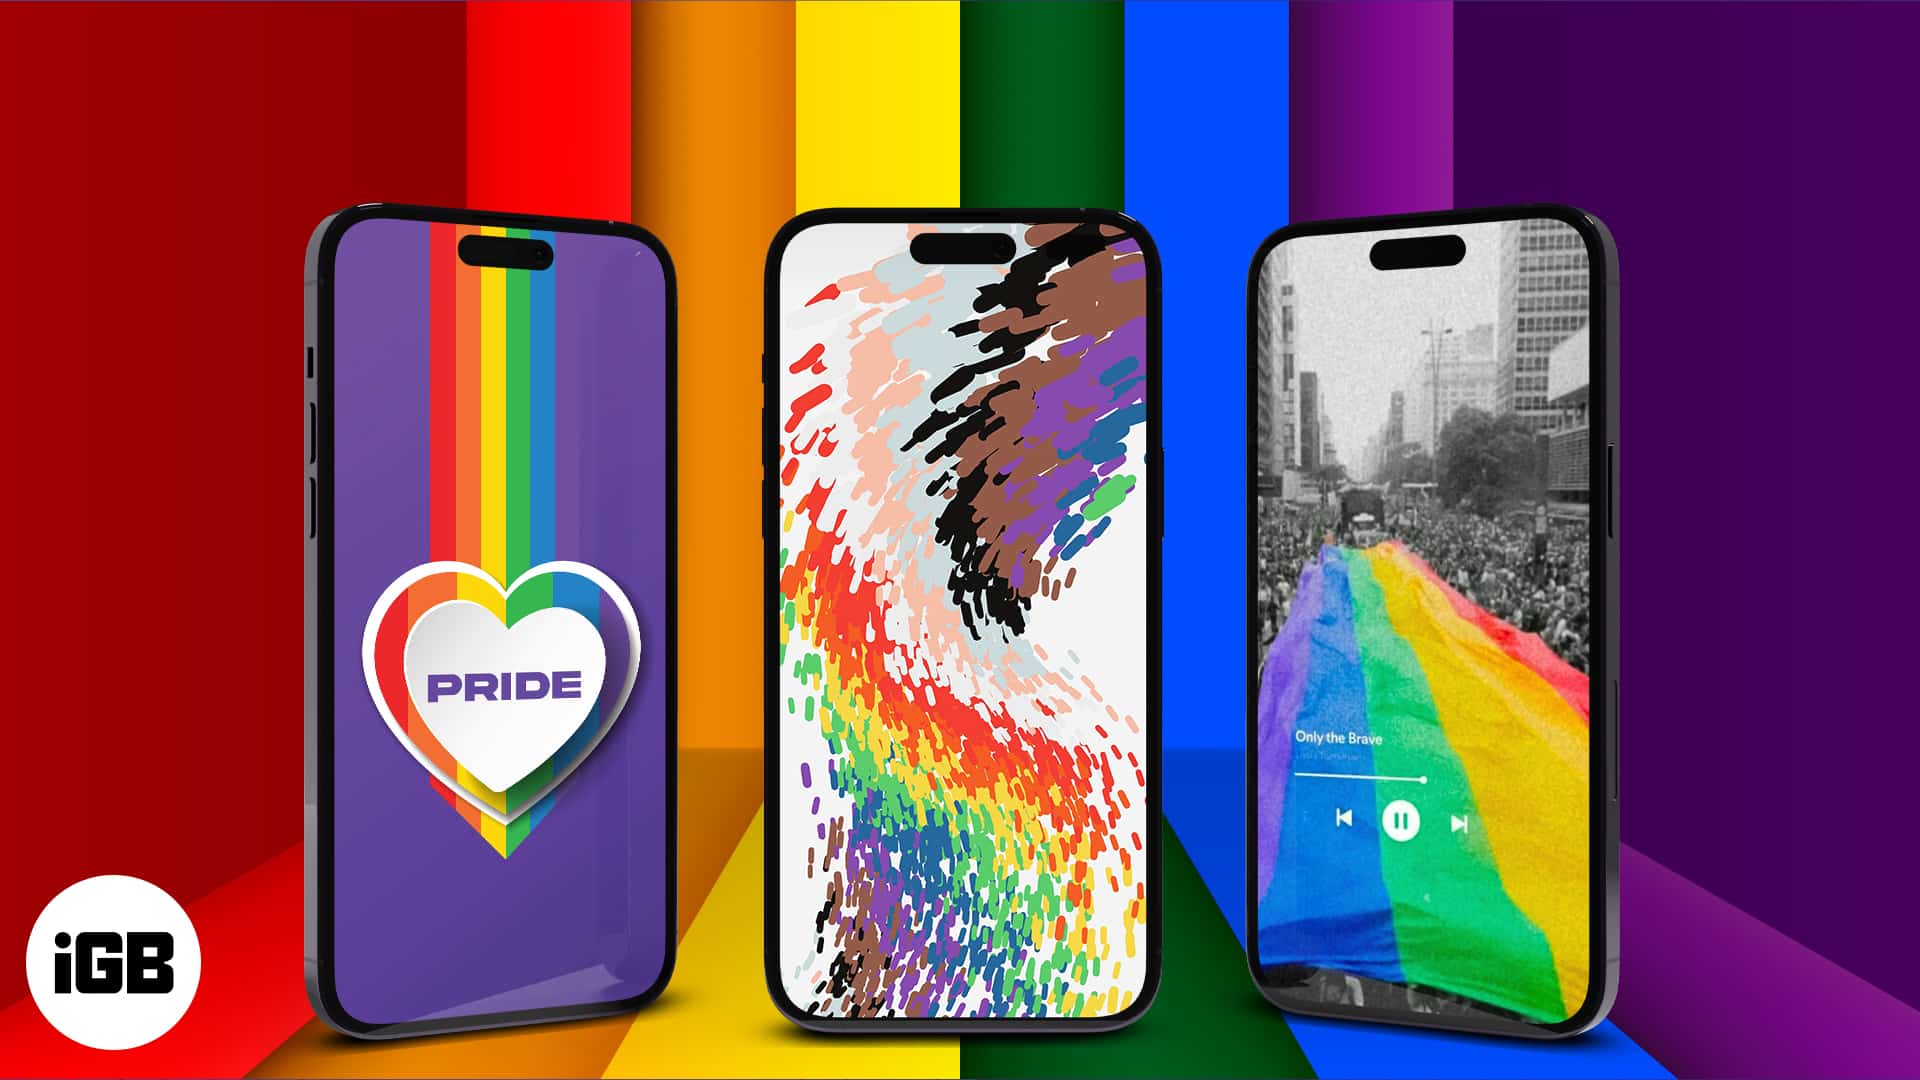 Download Apples New Pride Wallpaper for iPhone Here  iClarified